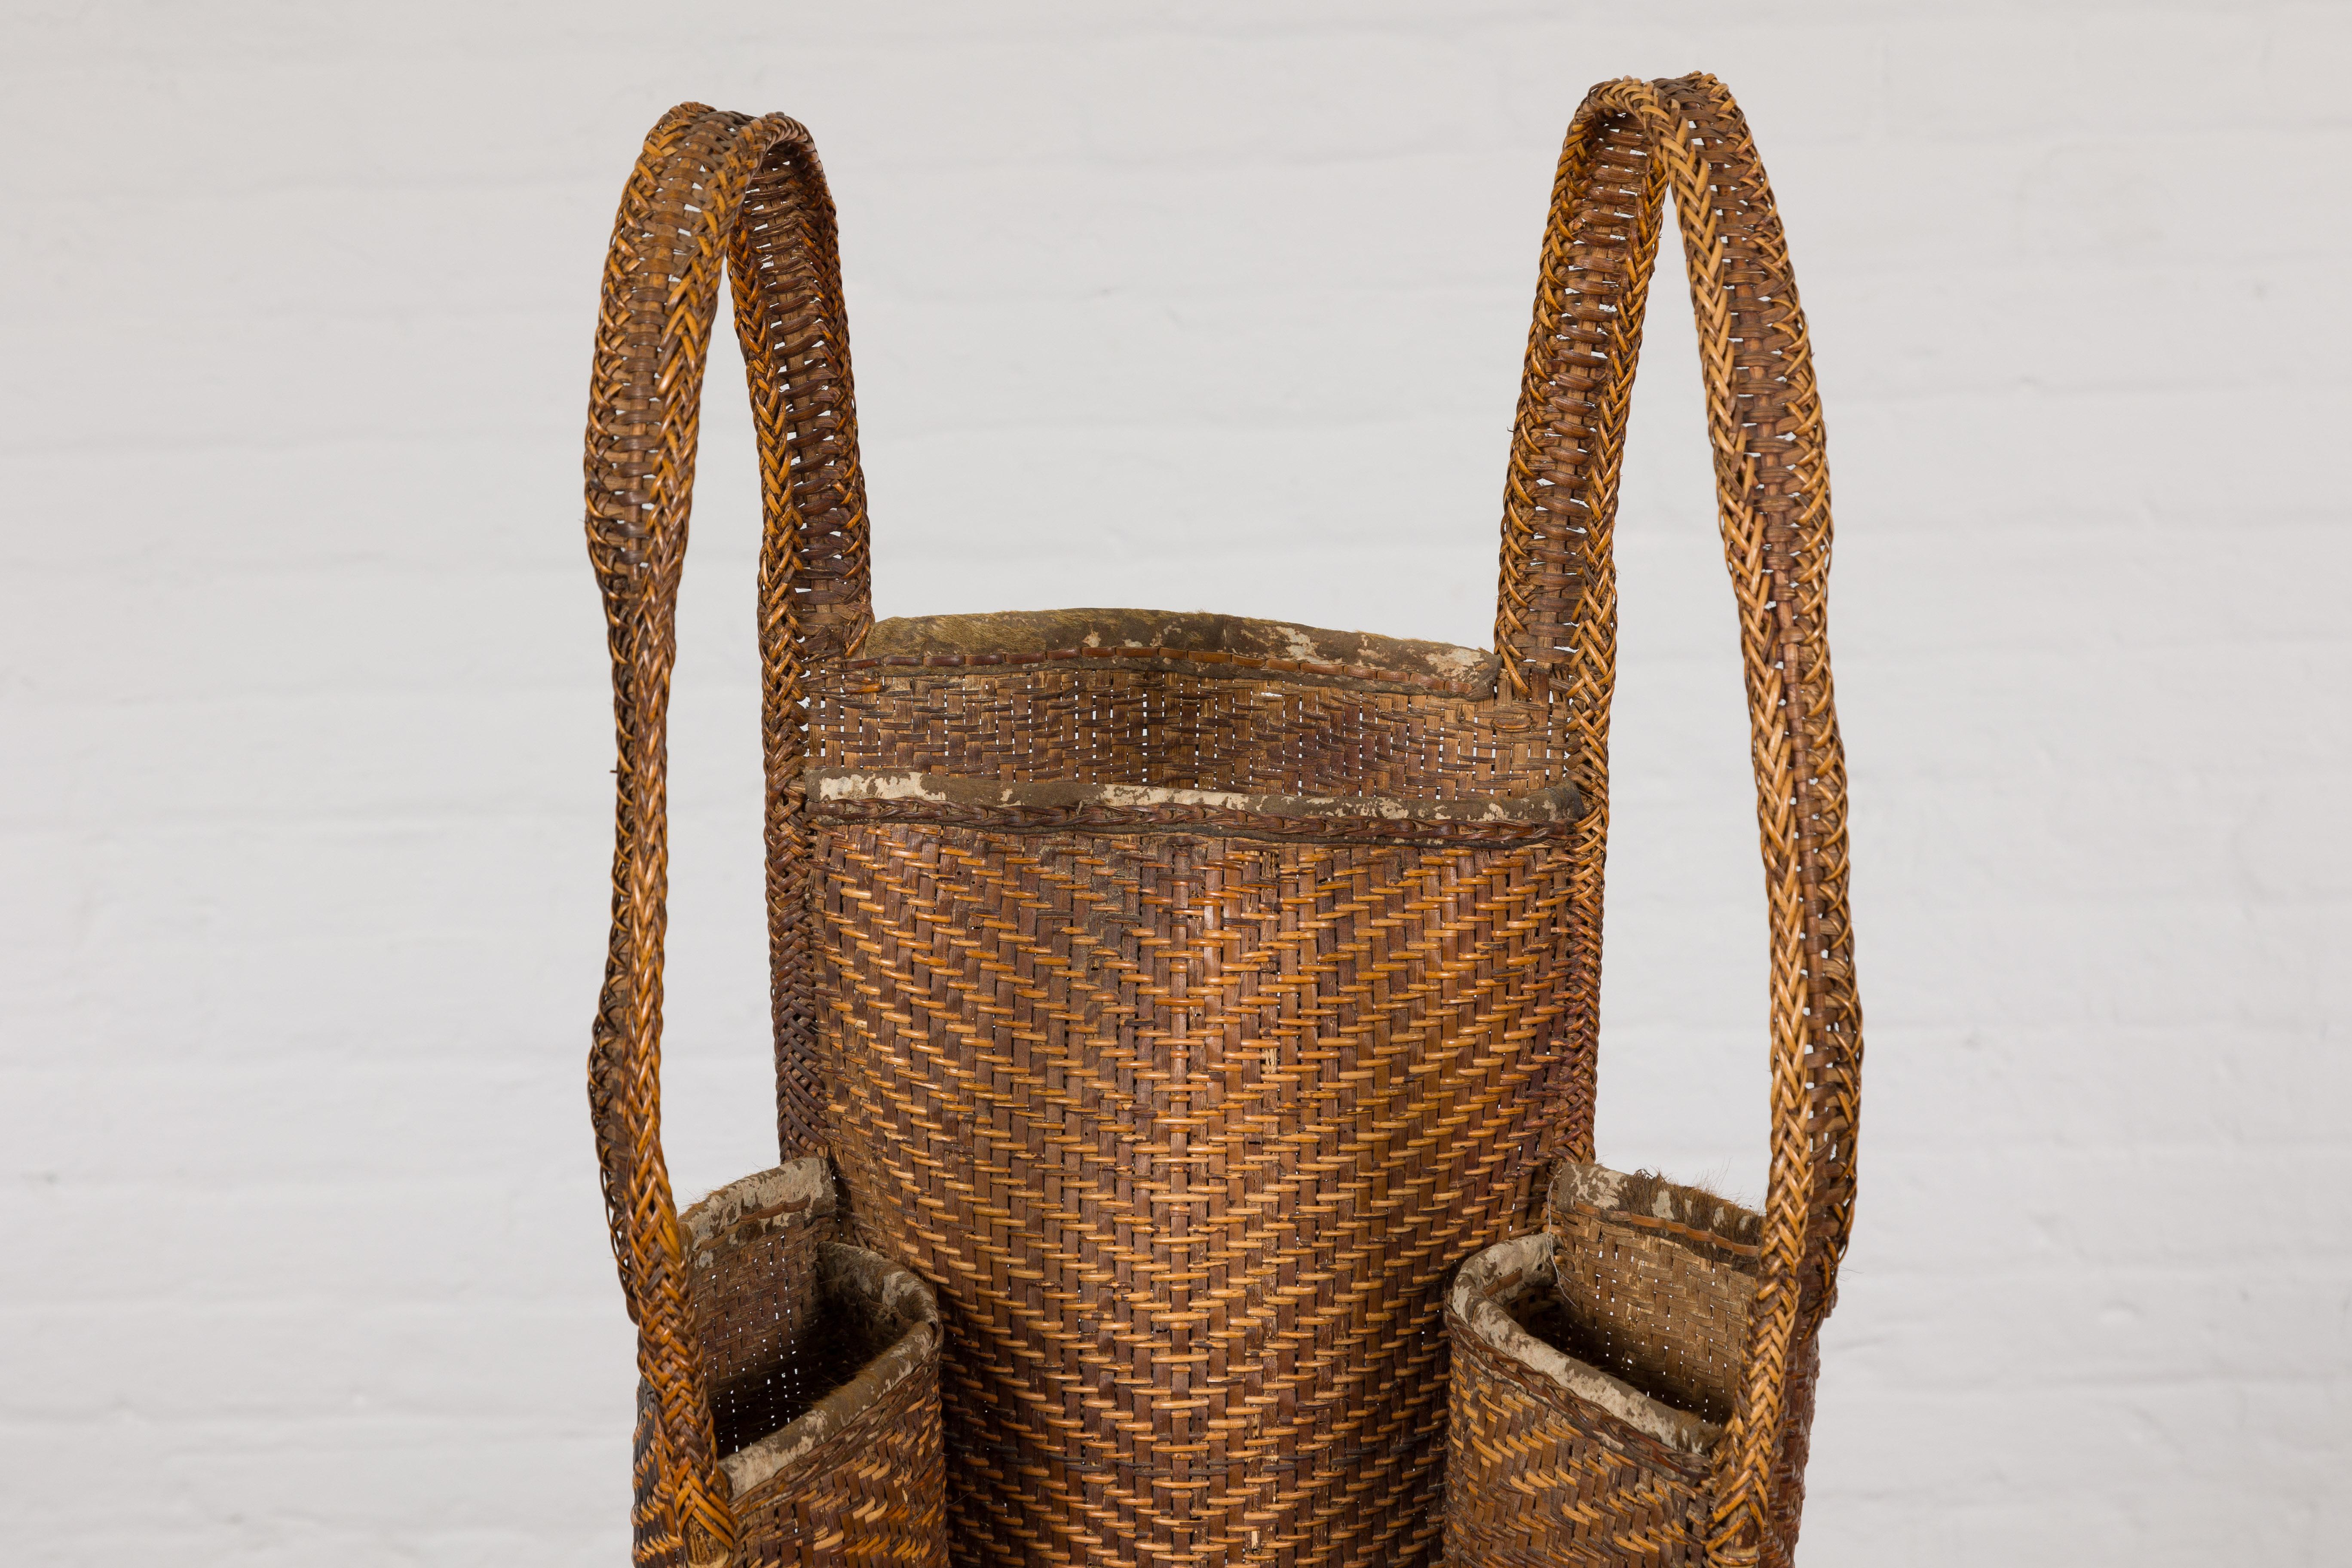 19th Century Tribal Handwoven Rattan Backpack with Inner Pockets In Good Condition For Sale In Yonkers, NY